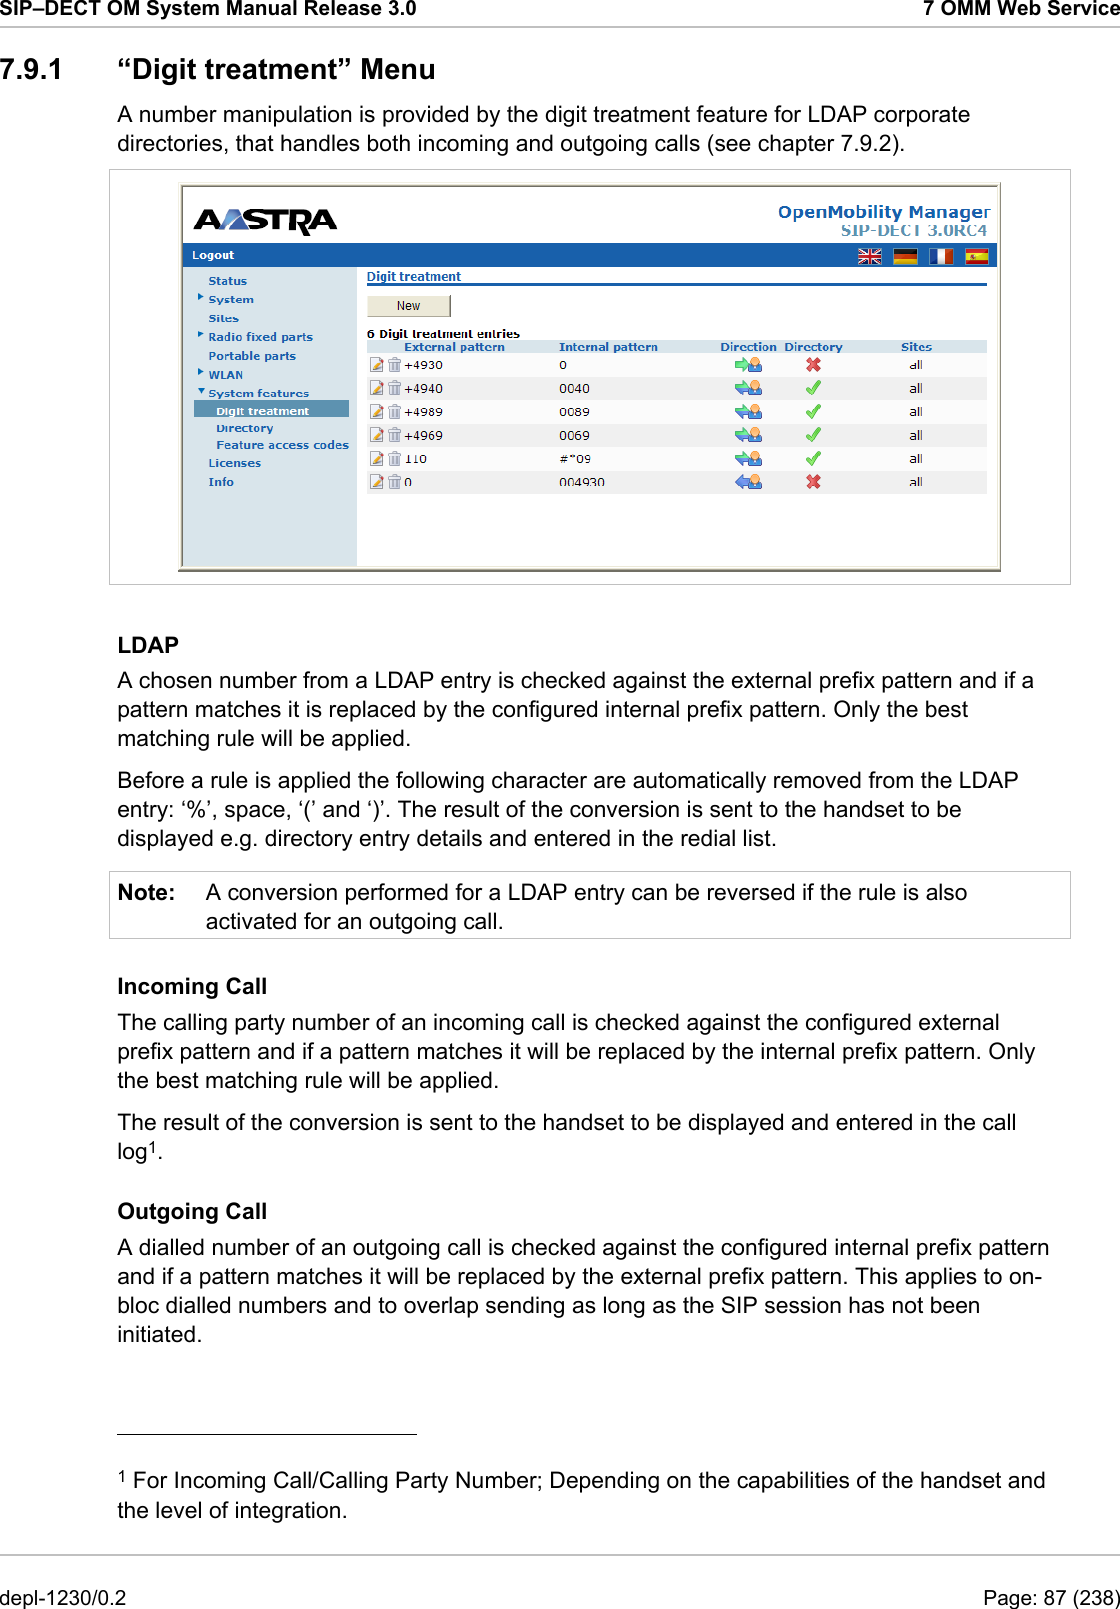 SIP–DECT OM System Manual Release 3.0  7 OMM Web Service 7.9.1 “Digit treatment” Menu A number manipulation is provided by the digit treatment feature for LDAP corporate directories, that handles both incoming and outgoing calls (see chapter 7.9.2).   LDAP A chosen number from a LDAP entry is checked against the external prefix pattern and if a pattern matches it is replaced by the configured internal prefix pattern. Only the best matching rule will be applied. Before a rule is applied the following character are automatically removed from the LDAP entry: ‘%’, space, ‘(’ and ‘)’. The result of the conversion is sent to the handset to be displayed e.g. directory entry details and entered in the redial list.  Note:  A conversion performed for a LDAP entry can be reversed if the rule is also activated for an outgoing call. Incoming Call The calling party number of an incoming call is checked against the configured external prefix pattern and if a pattern matches it will be replaced by the internal prefix pattern. Only the best matching rule will be applied. The result of the conversion is sent to the handset to be displayed and entered in the call log1. Outgoing Call A dialled number of an outgoing call is checked against the configured internal prefix pattern and if a pattern matches it will be replaced by the external prefix pattern. This applies to on-bloc dialled numbers and to overlap sending as long as the SIP session has not been initiated.                                             1 For Incoming Call/Calling Party Number; Depending on the capabilities of the handset and the level of integration. depl-1230/0.2  Page: 87 (238) 